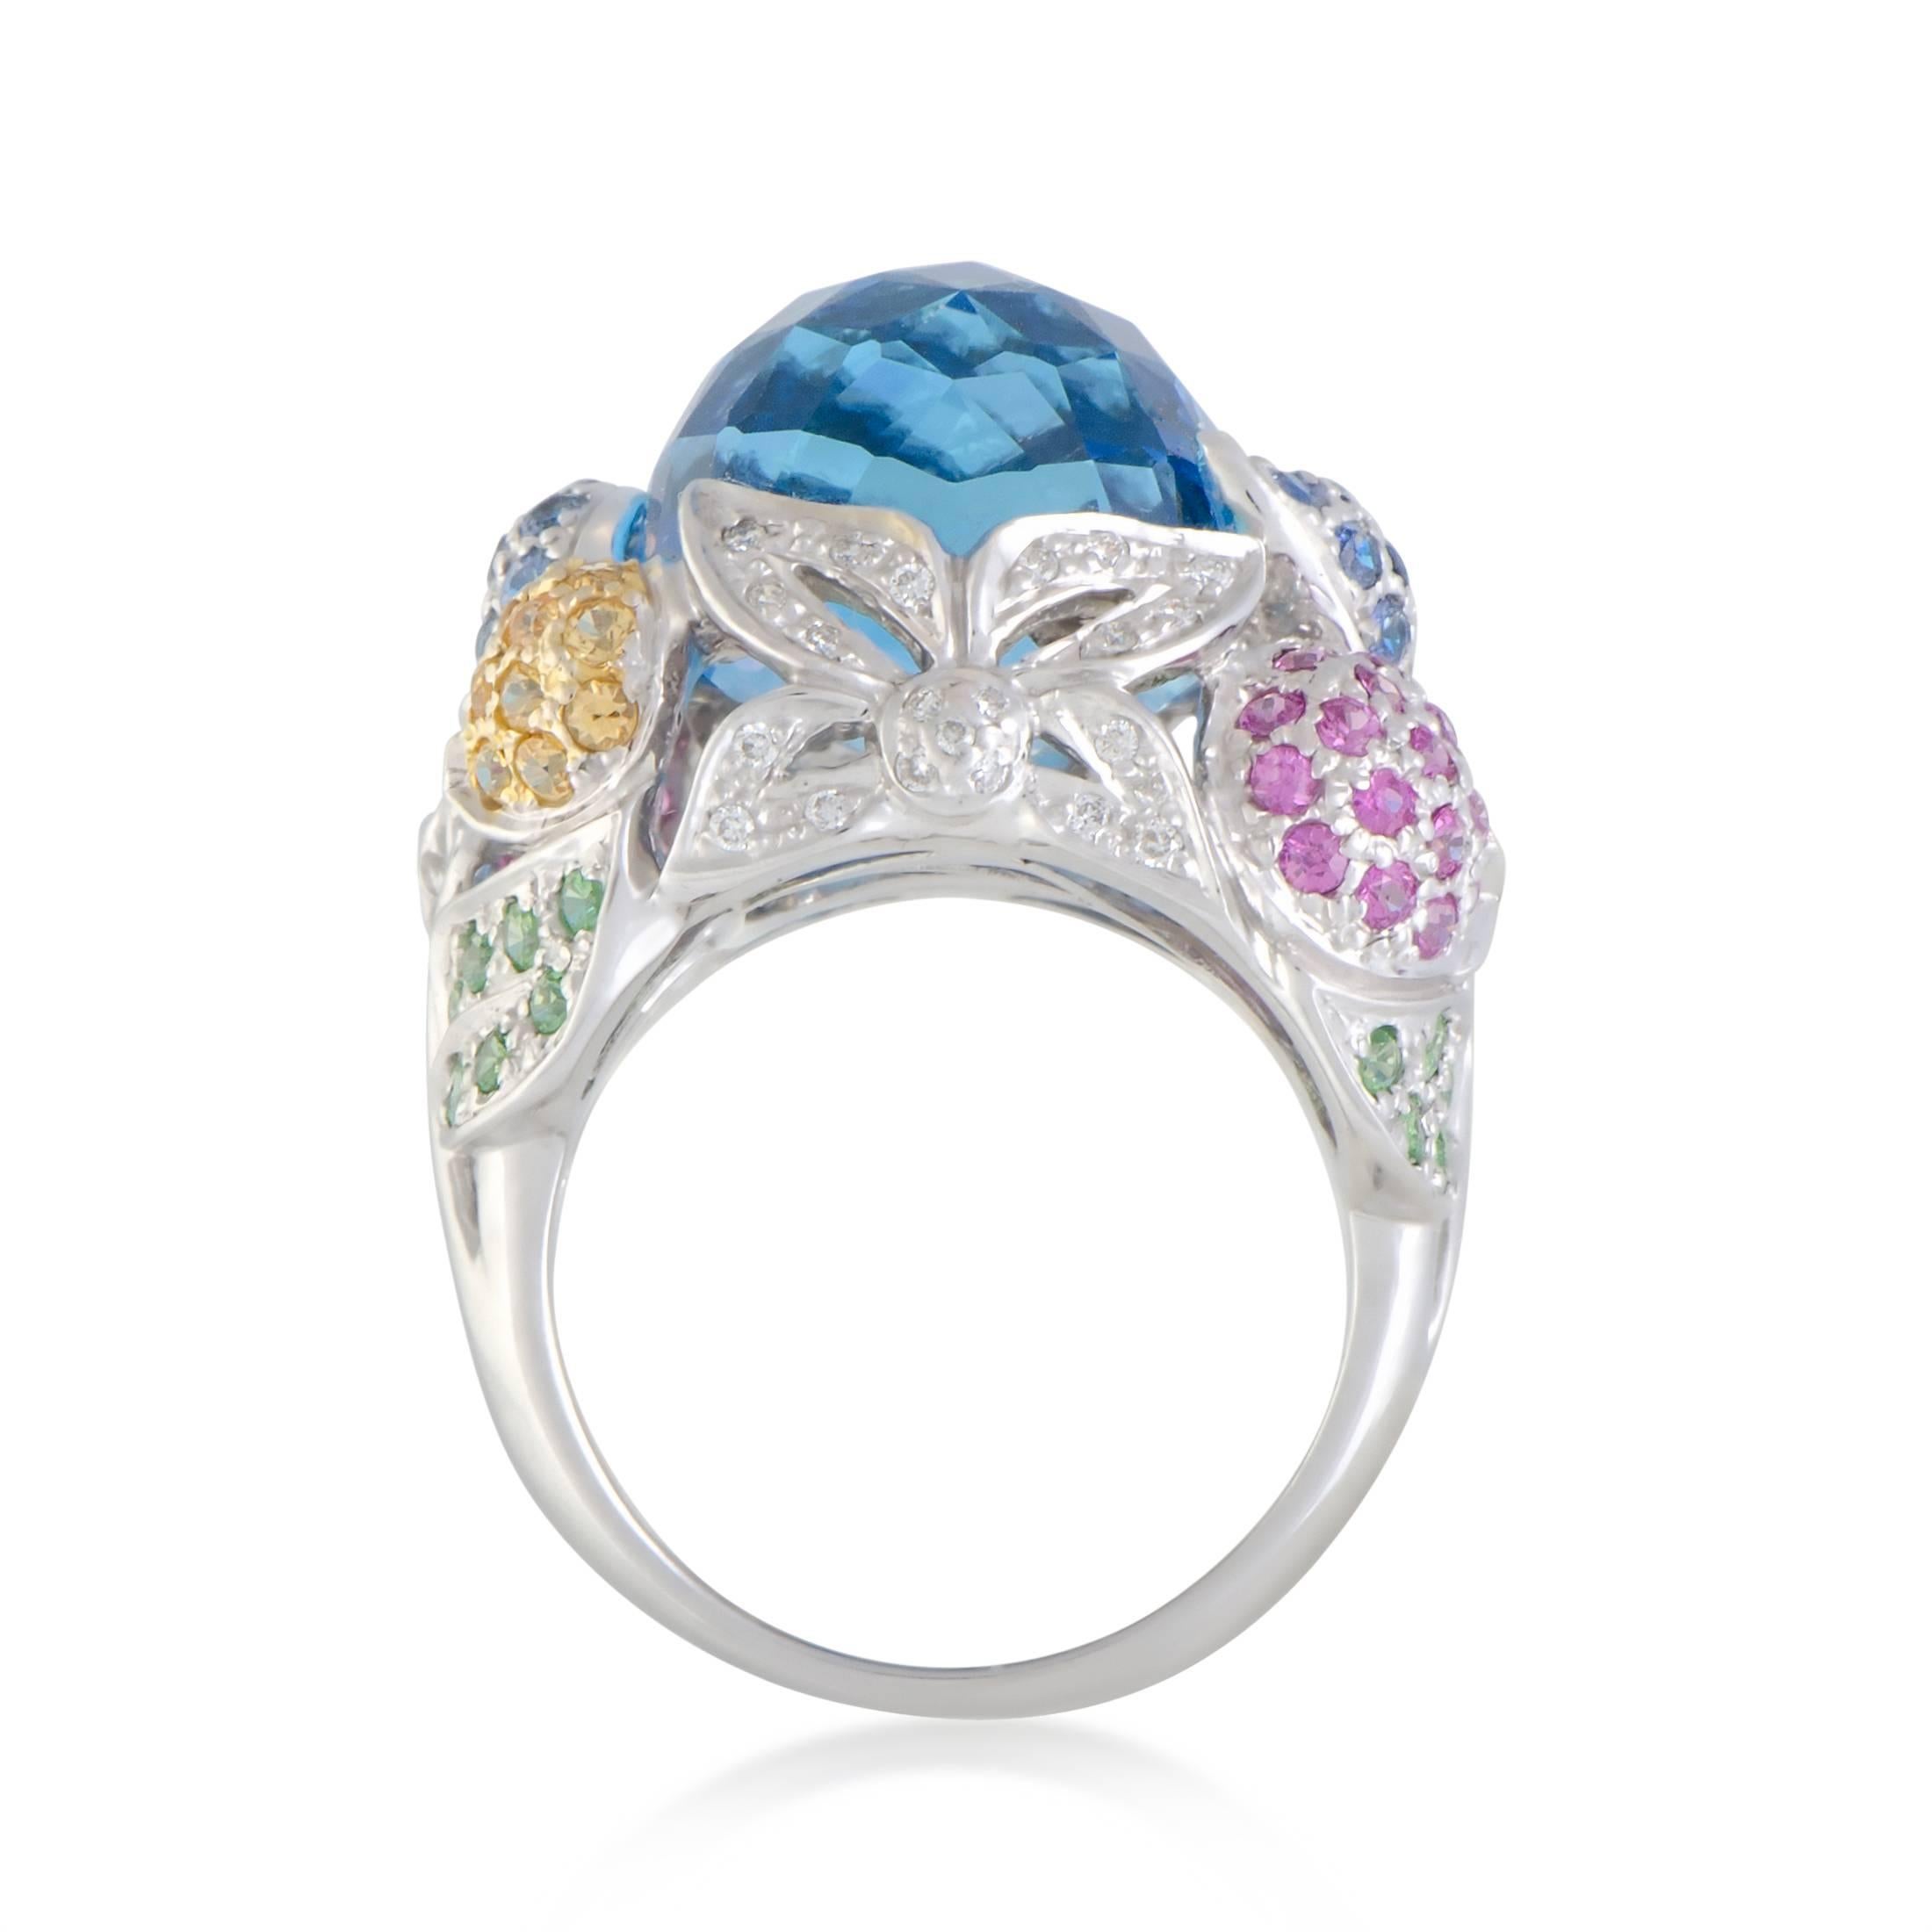 Producing a truly extraordinary sight and a simply unforgettable visual effect by brilliantly combining diverse gems, this astonishing 18K white gold ring boasts scintillating diamonds amounting to 0.20ct and vivacious multicolored sapphires beneath